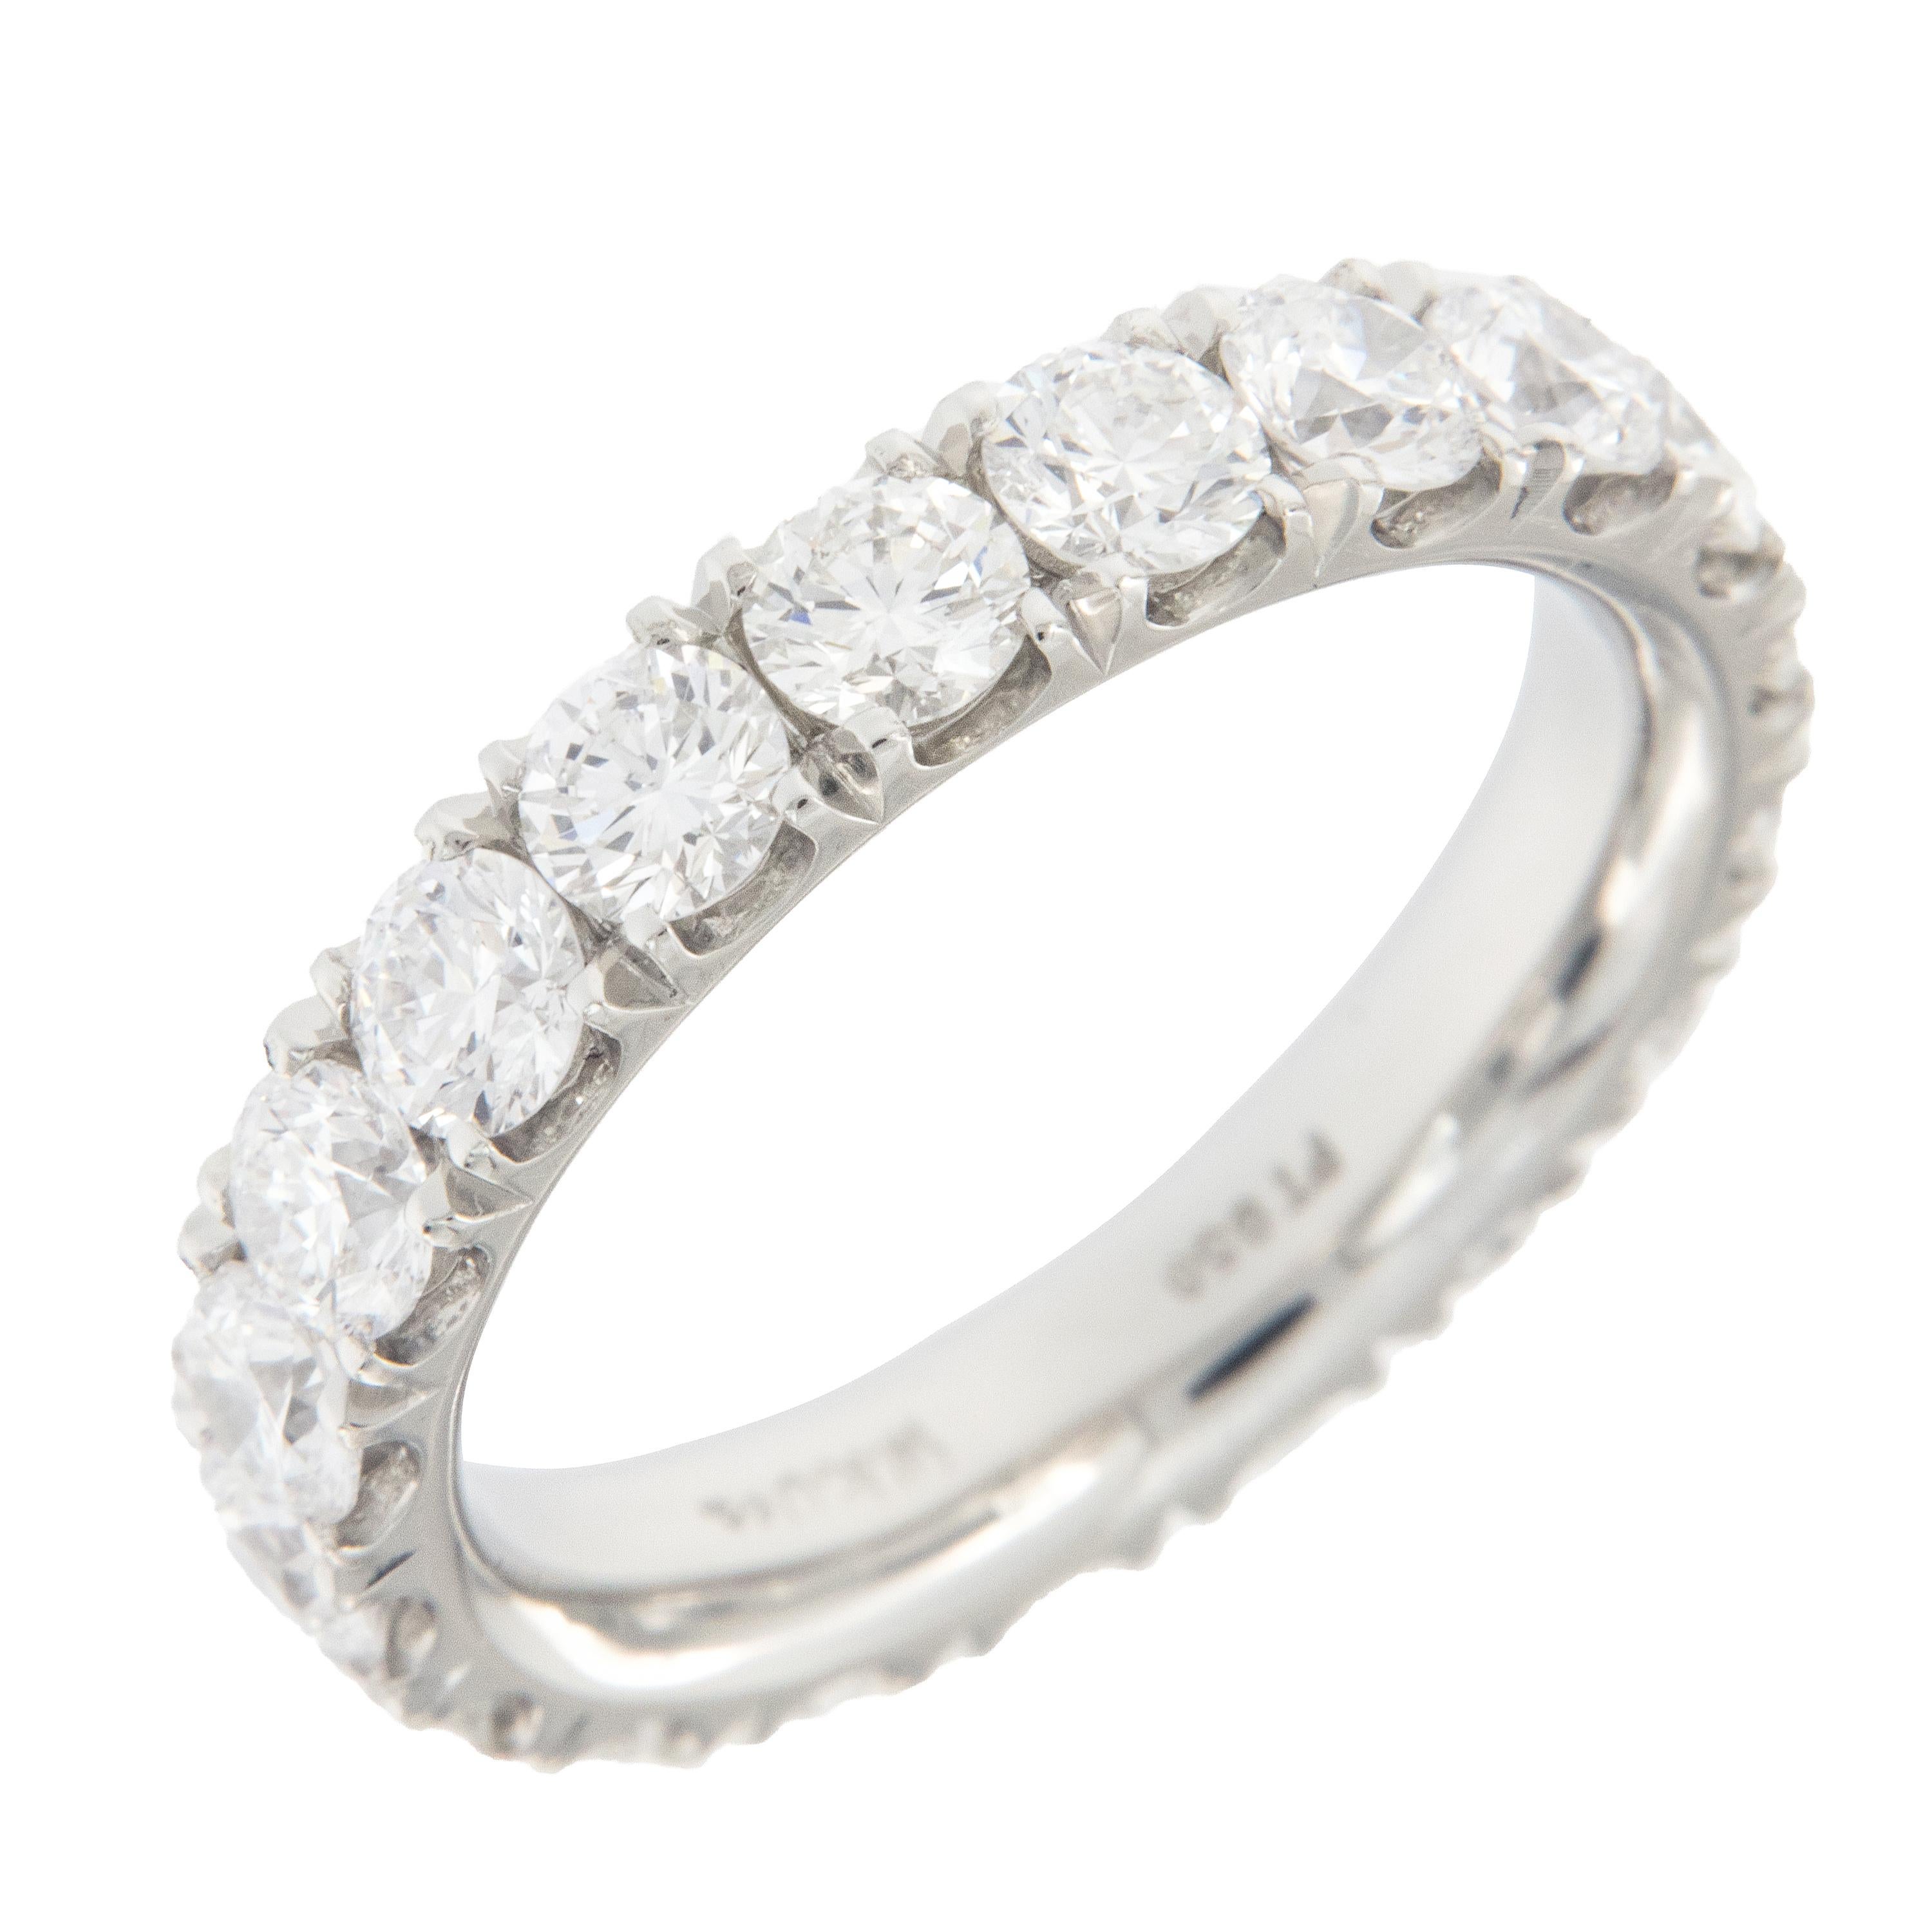 Expertly hand fabricated eternity band by William Rosenberg made from noble metal platinum with scalloped, split prong set round brilliant diamonds = 2.78 Cttw. These exceptional diamonds show hearts & arrows and are of VVS clarity & D-F color. This